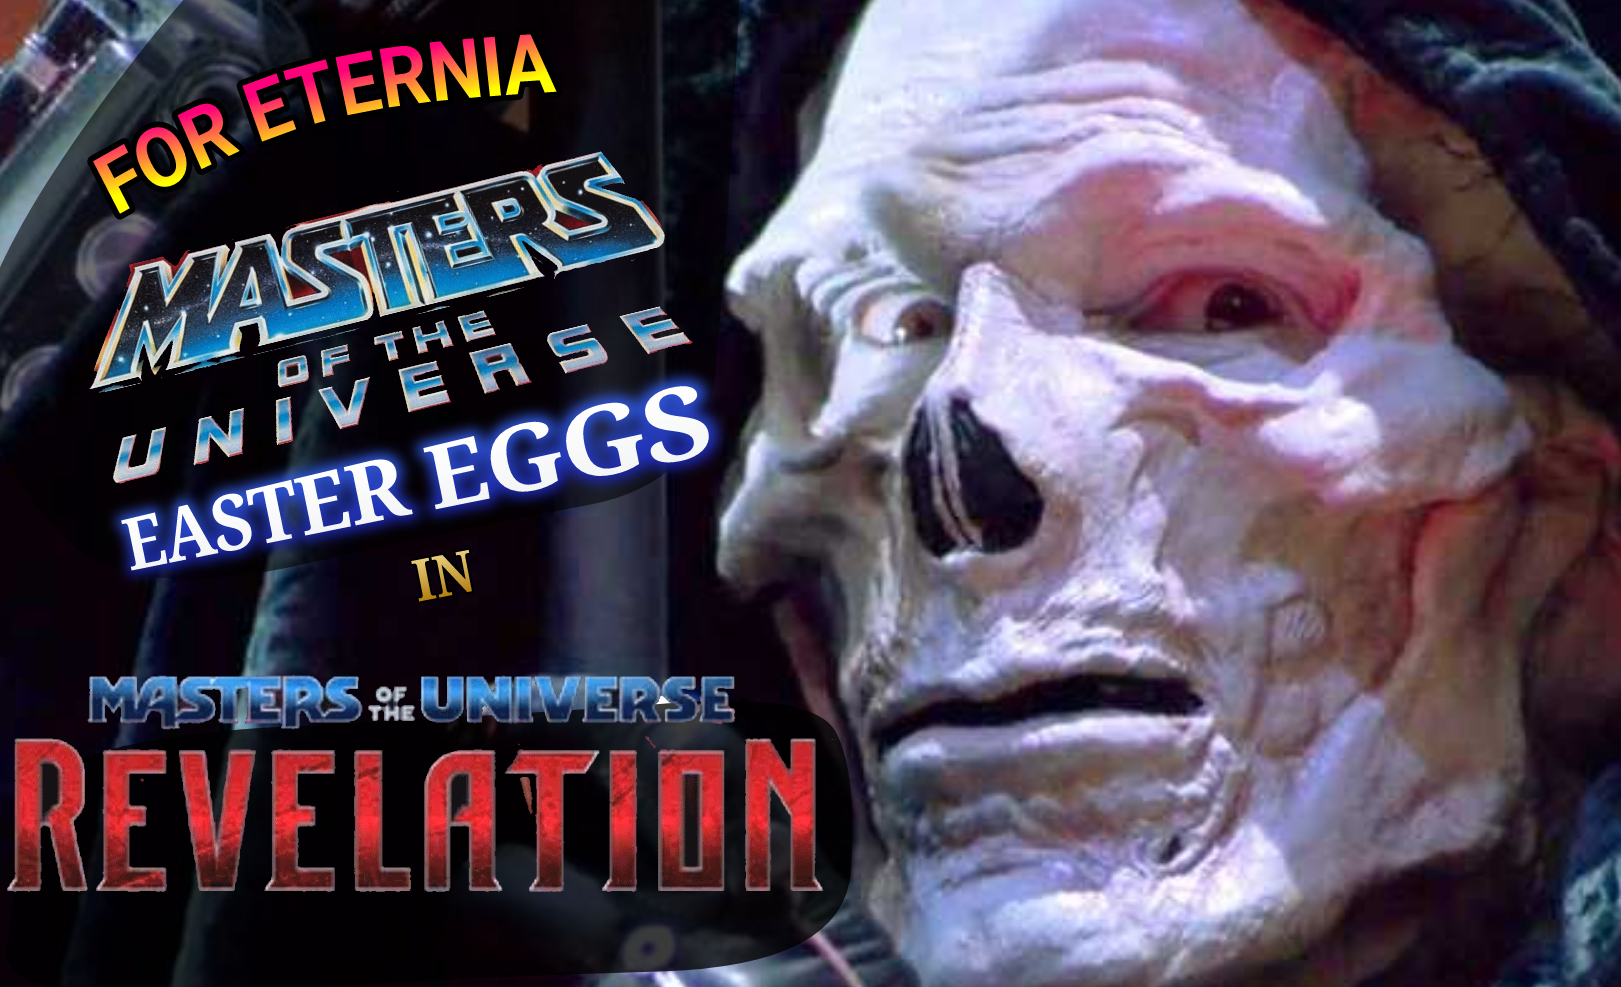 Watch every ”Masters of the Universe” 1986 Movie Easter Egg in ”Masters of the Universe: Revelation”